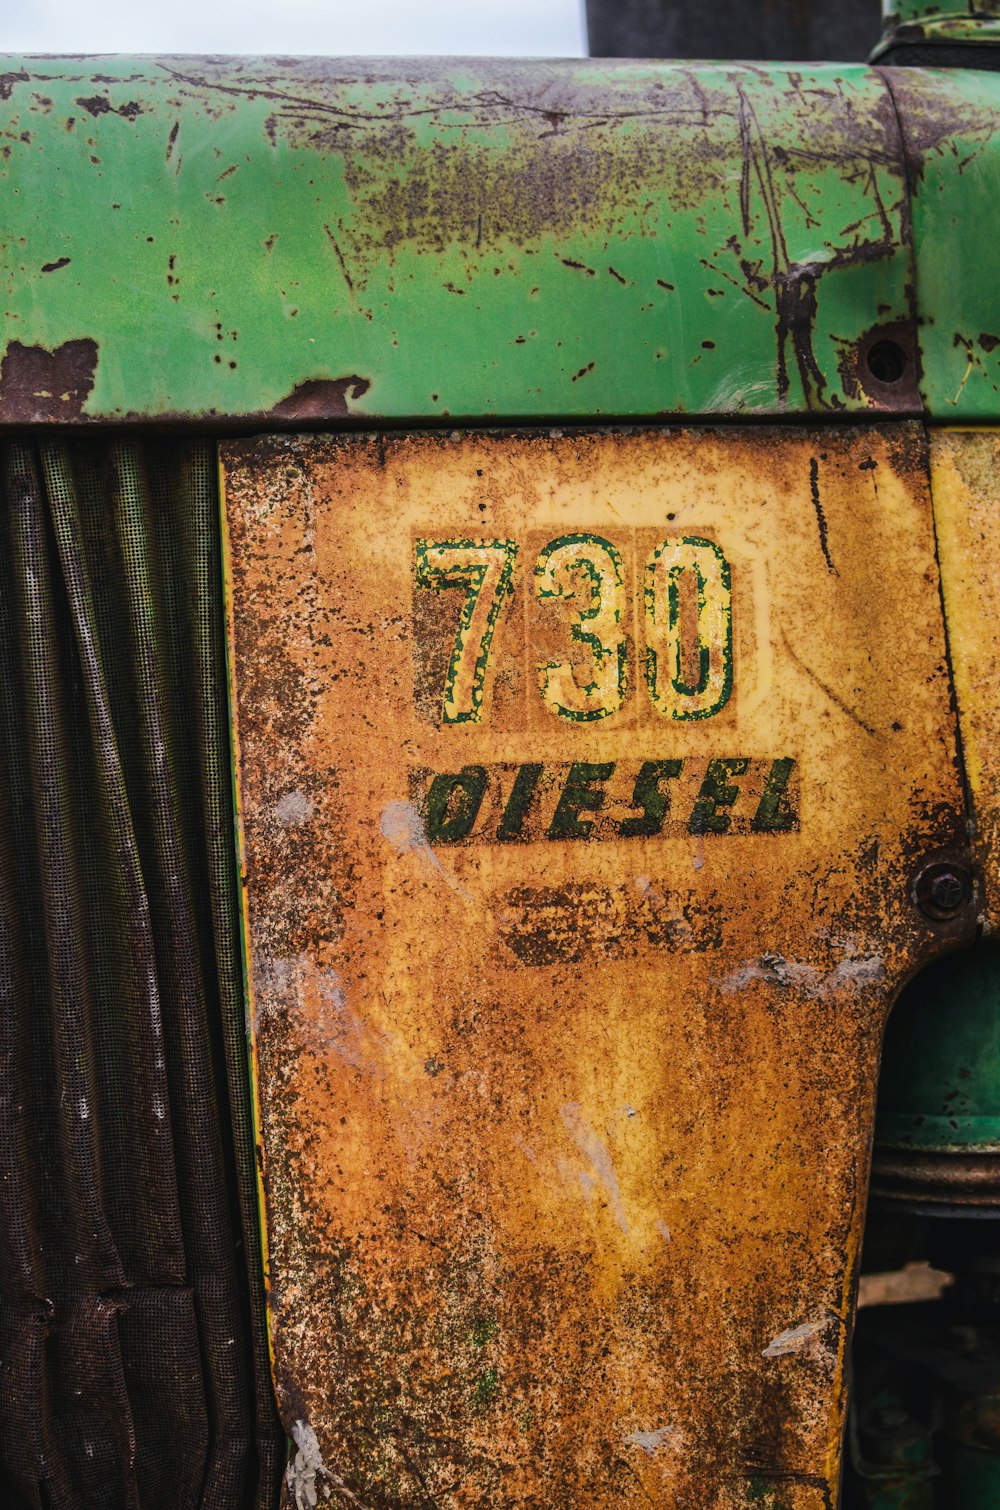 a close up of the front of an old green tractor